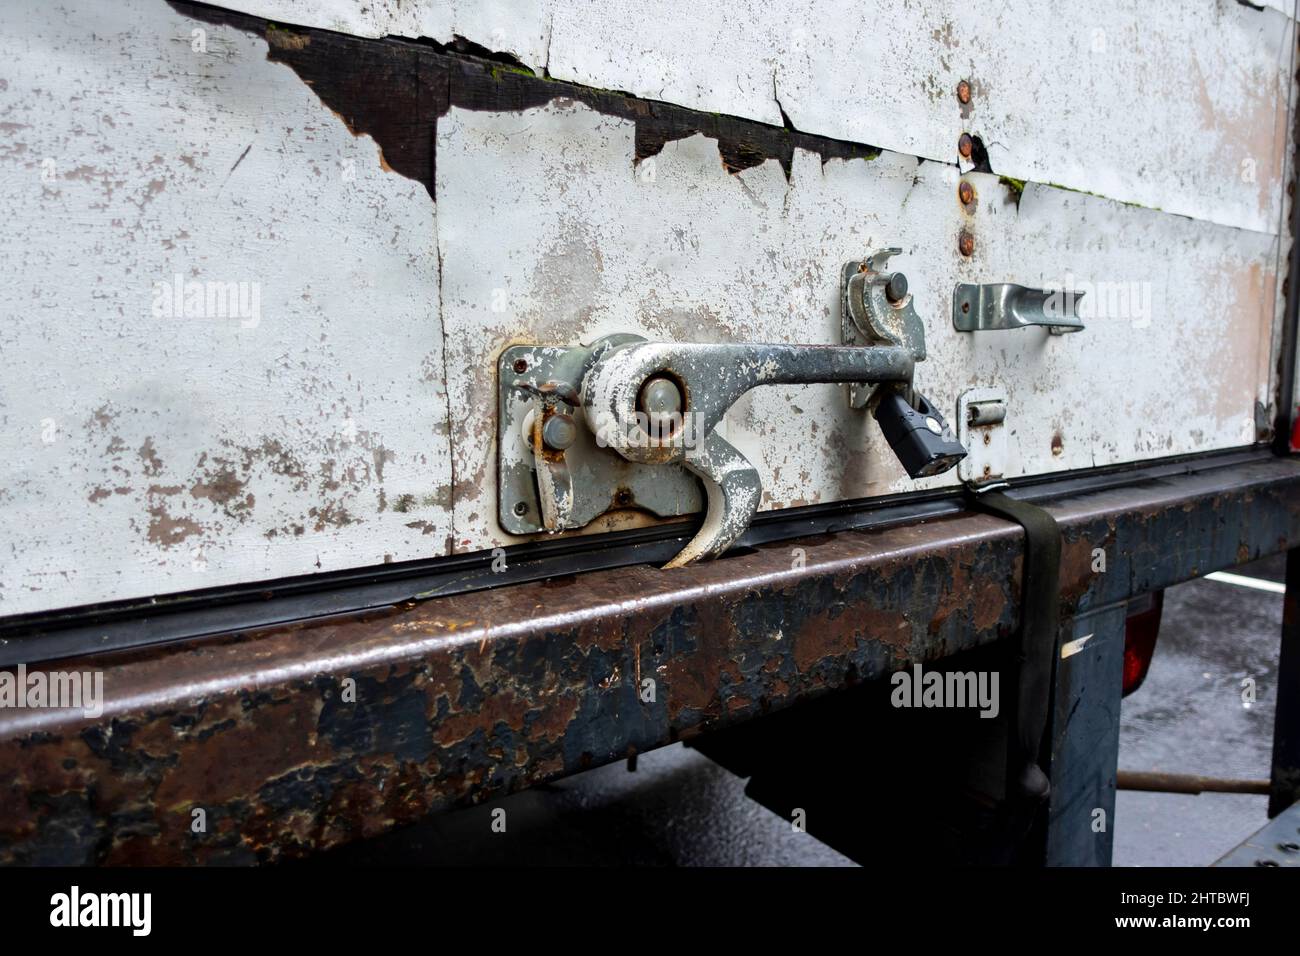 Angled close up view of a rusted metal latch on the back of a white moving truck, with a black step ladder attached Stock Photo